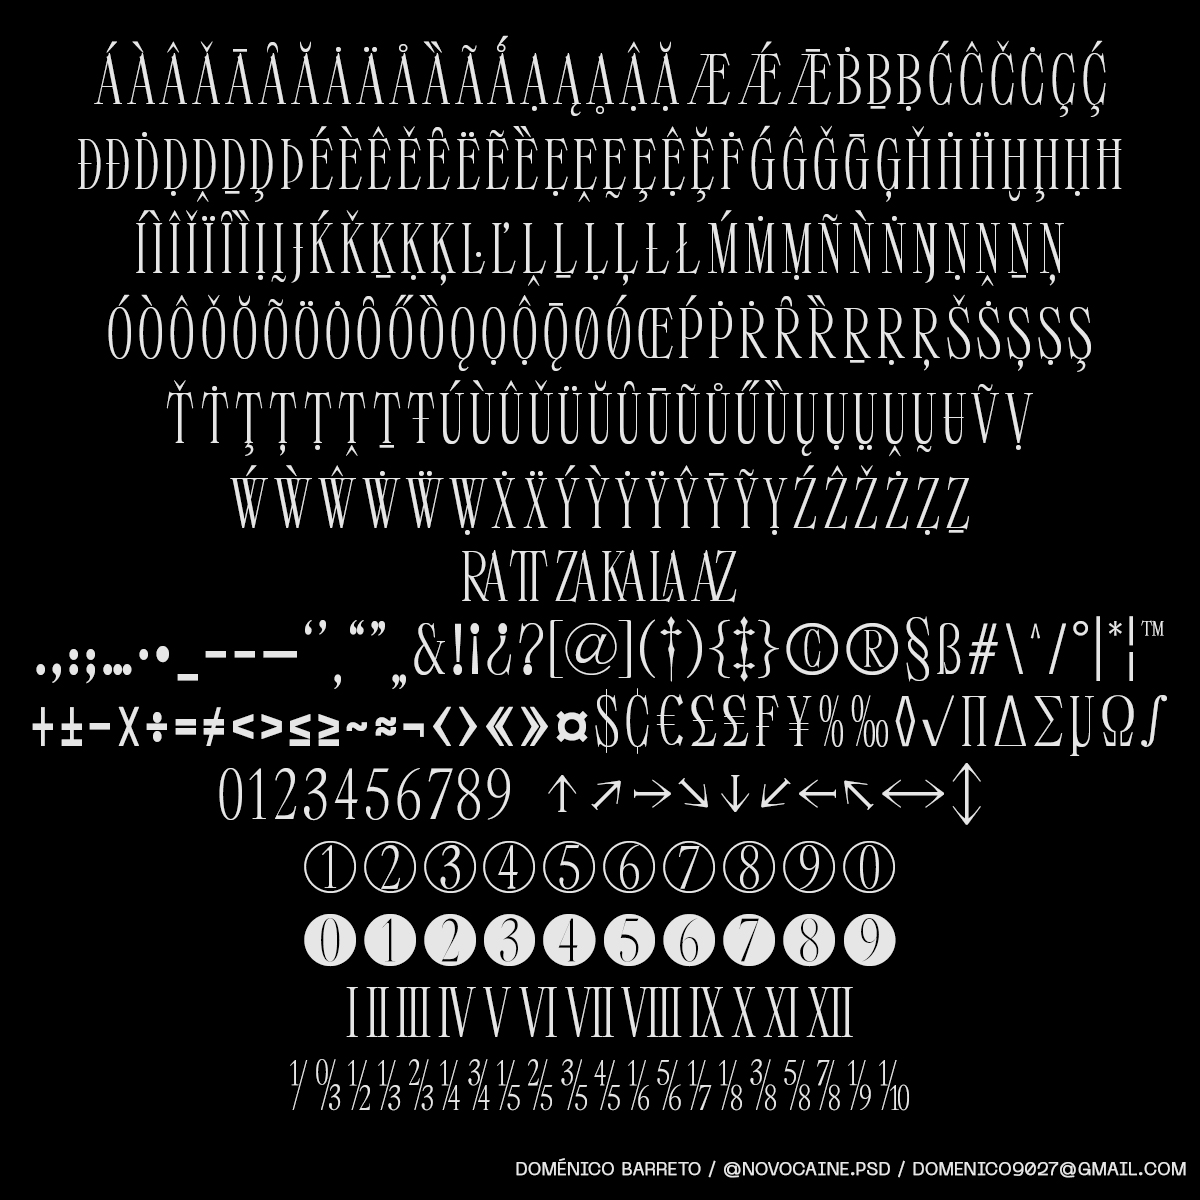 Longinus full glyph set on a black and white background. Doménico Barreto Deep Dives Into the Aesthetic of His Latest Typeface 